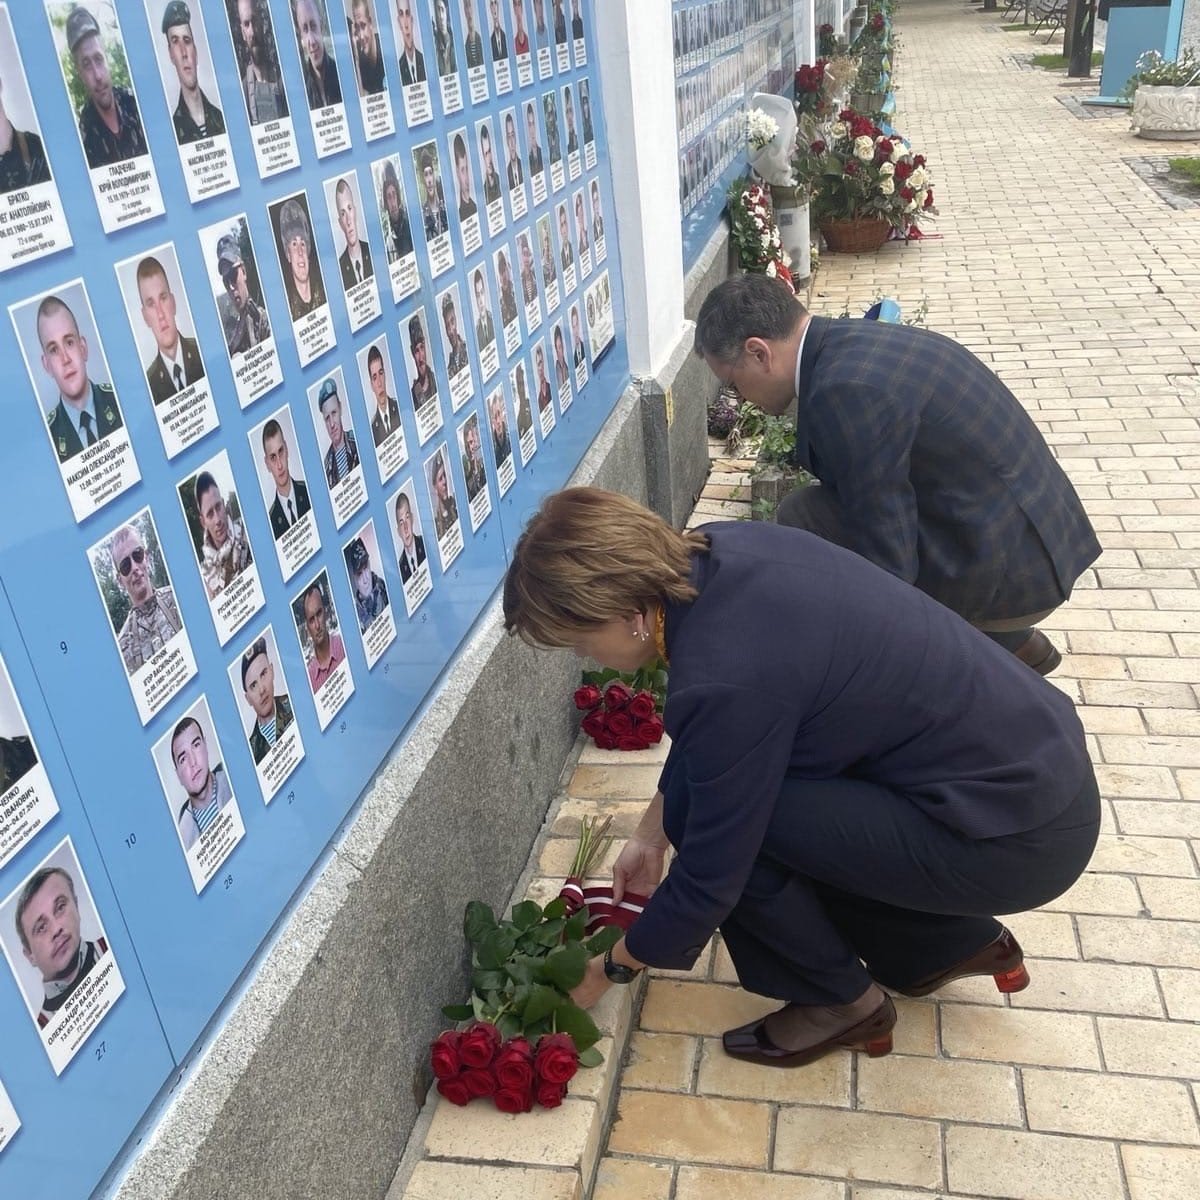 Ministers @Braze_Baiba 🇱🇻 & @DmytroKuleba 🇺🇦 at the Wall of Remembrance in Kyiv honour those fallen in Russia's war of aggression. This is the Latvian Minister's first bilateral visit abroad signifying that support to Ukraine is a high priority in Latvia's foreign policy.